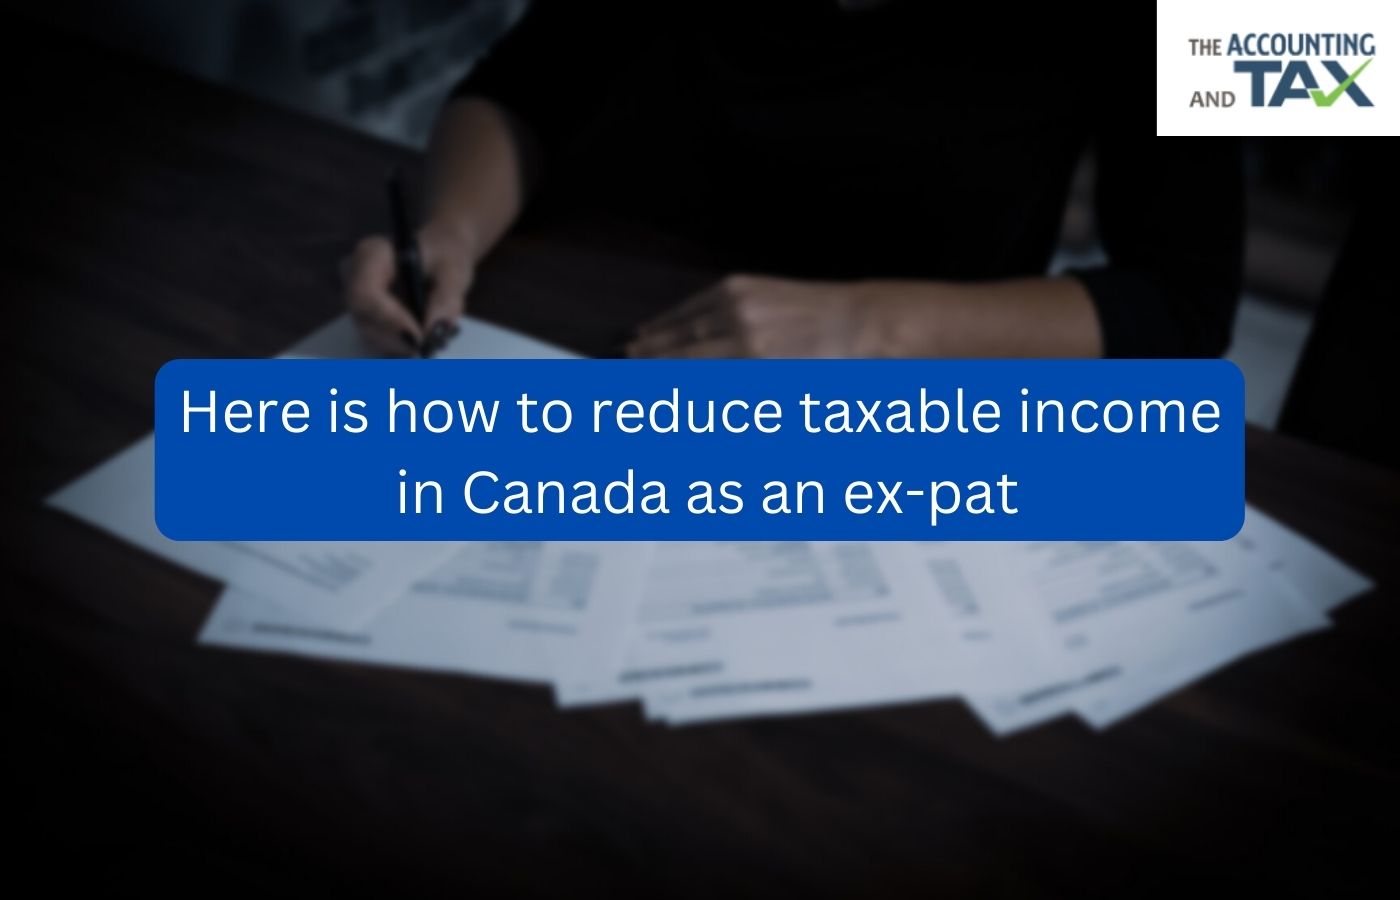 Here is how to reduce taxable income in canada - The Accounting & Tax